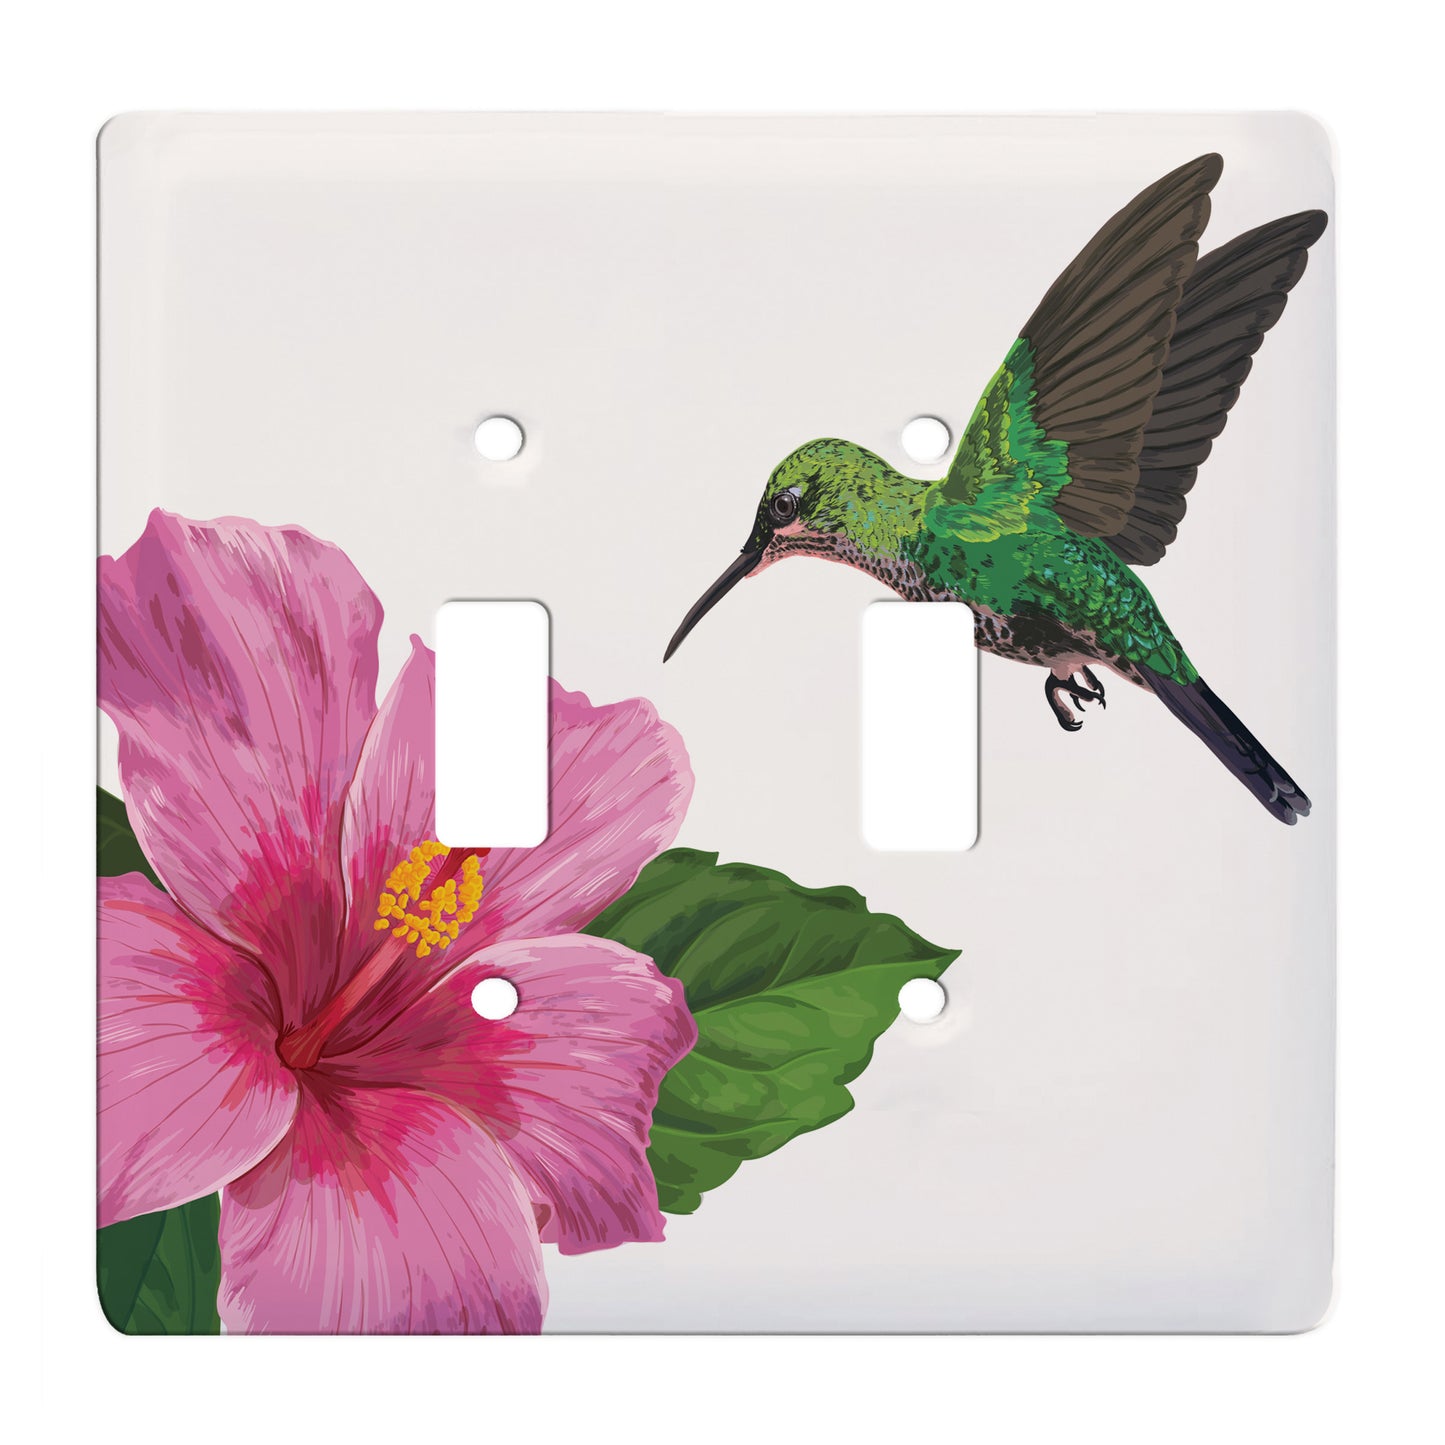 ceramic double toggle switch plate featuring green hummingbird hovering over pink hibiscus flower.